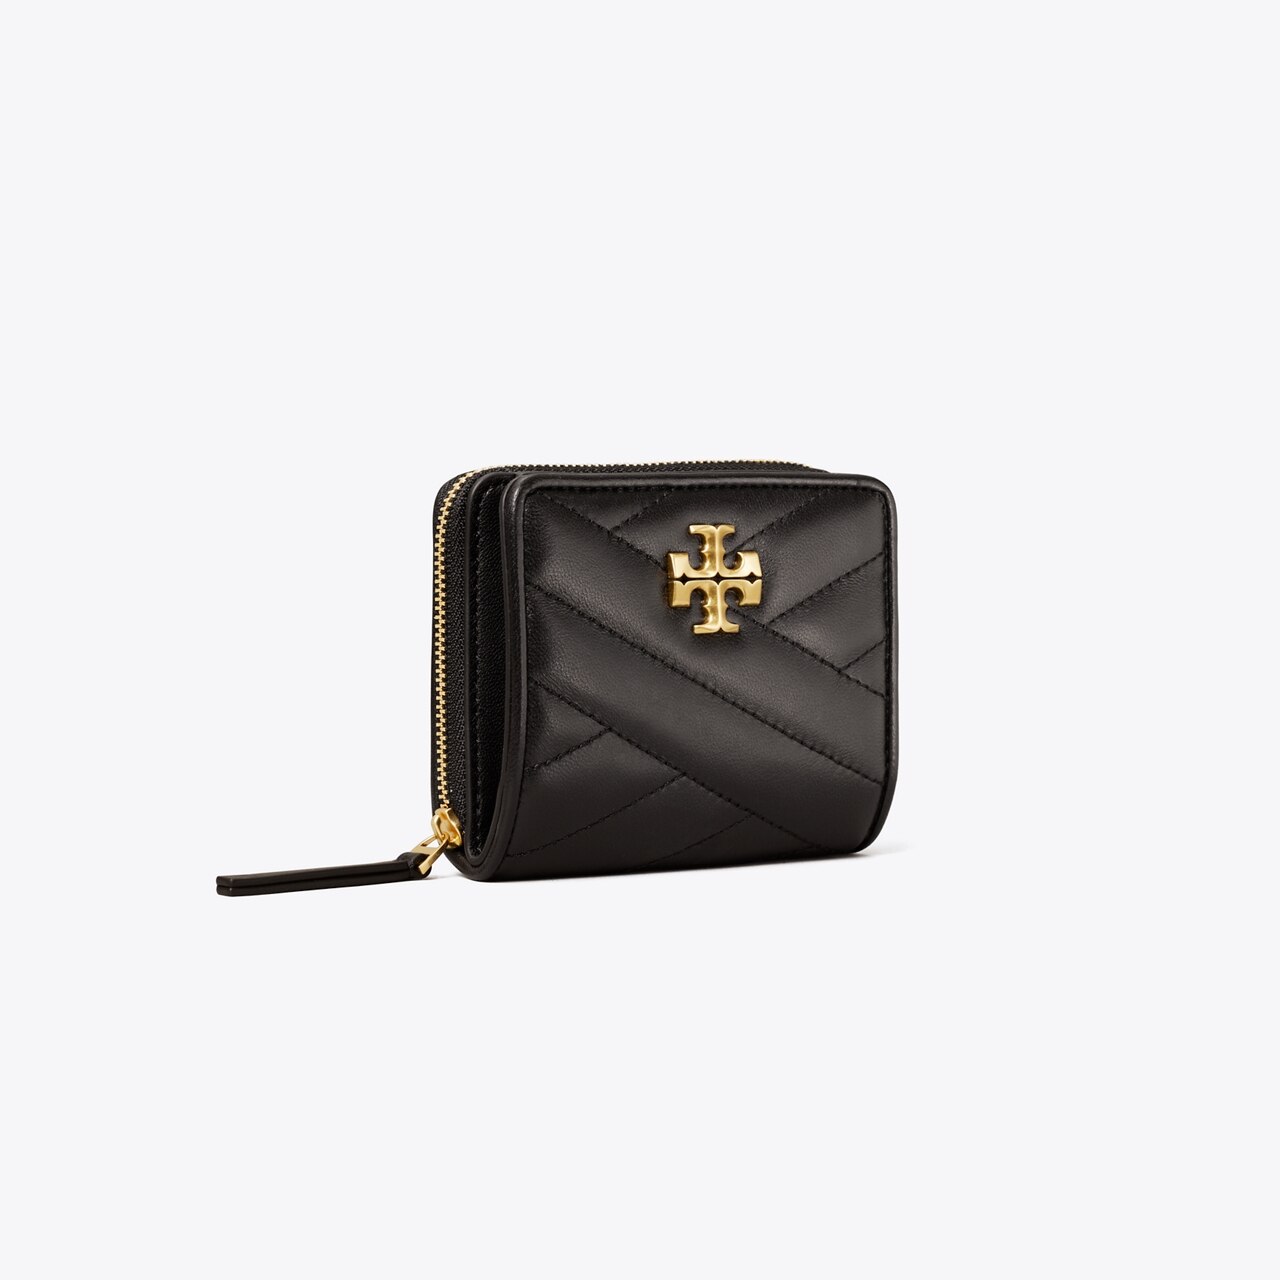 Tory Burch Kira Chevron Quilted Leather Bifold Wallet - Black